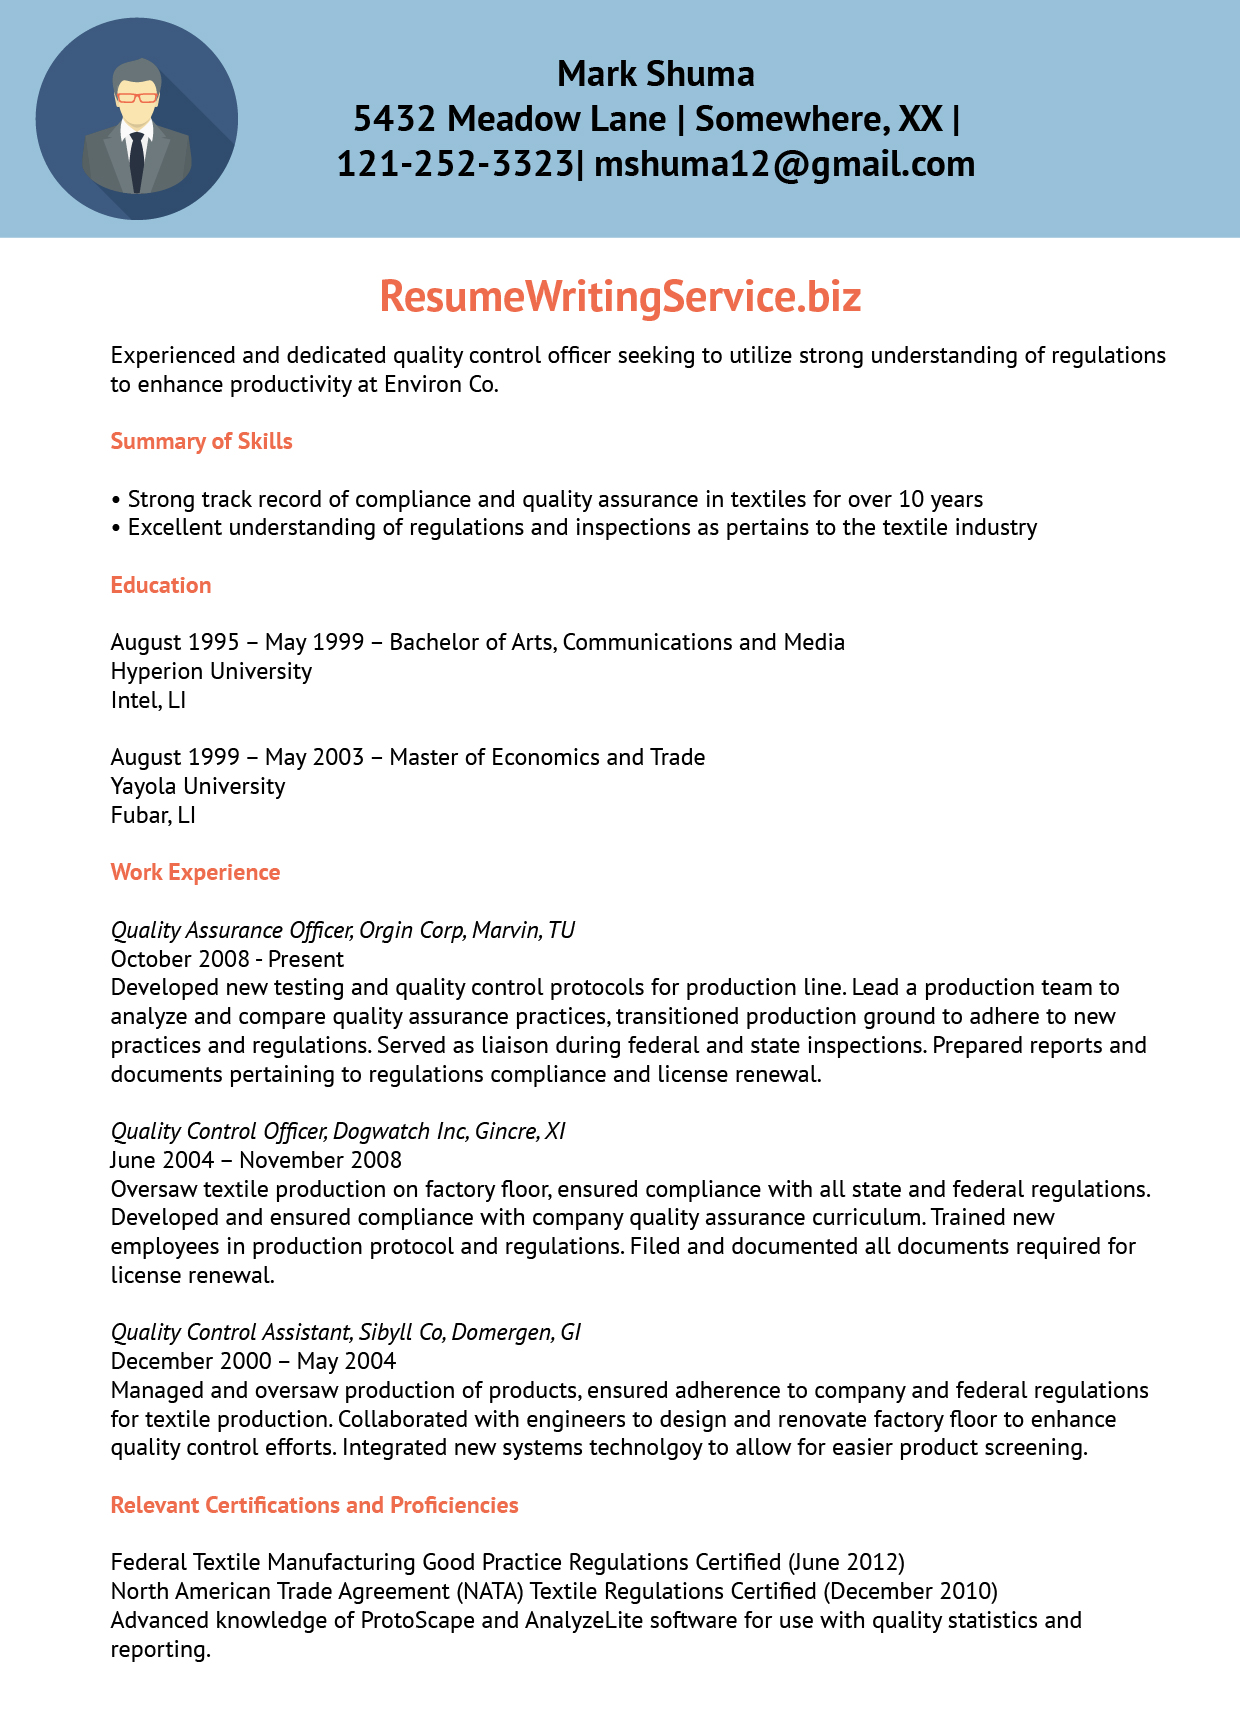 How to become a certified professional resume writer